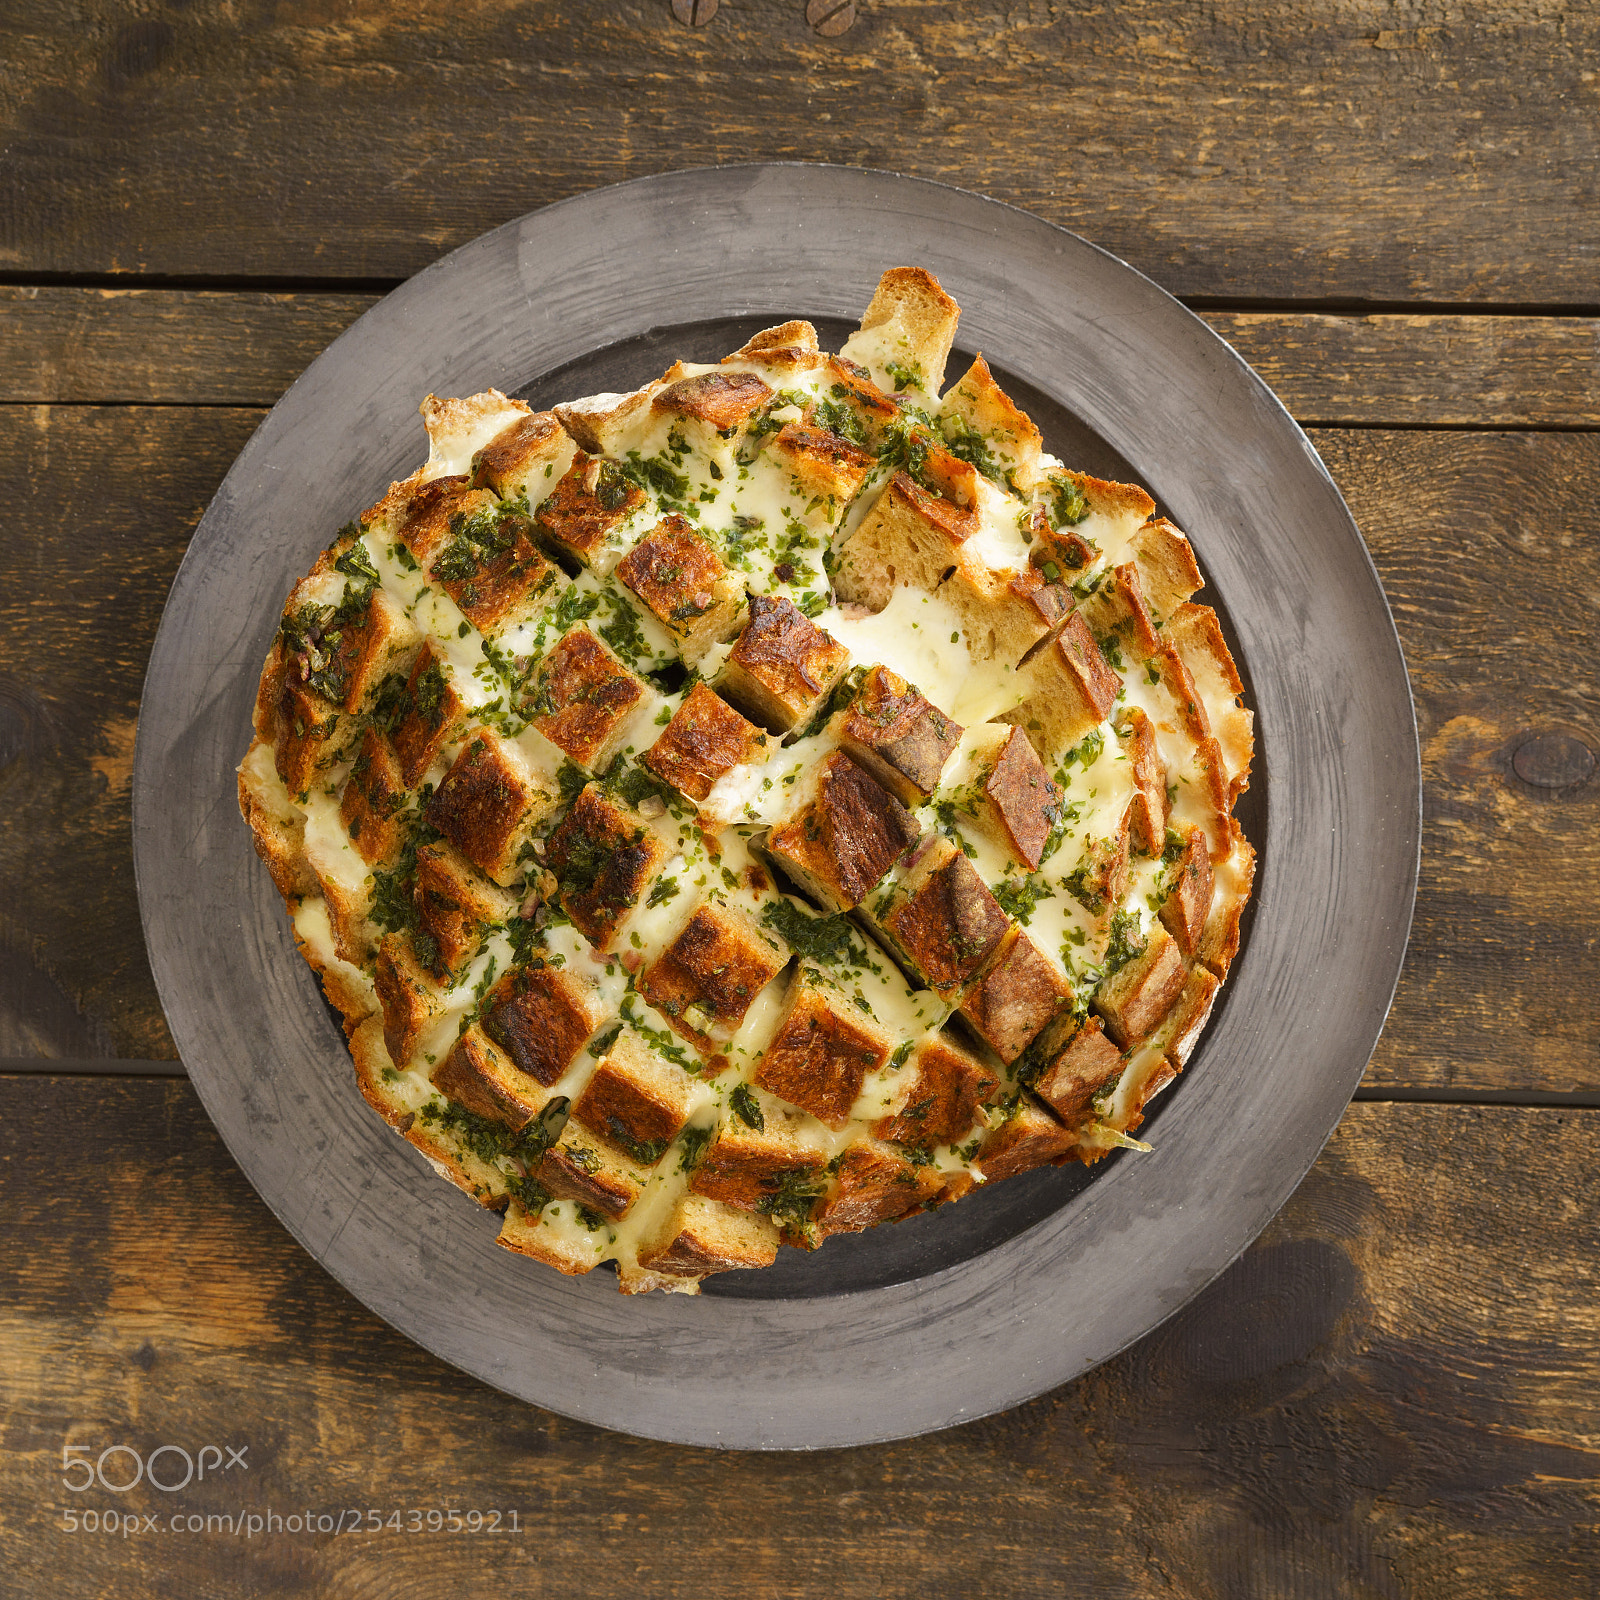 Sony a7R sample photo. Pull apart bread photography